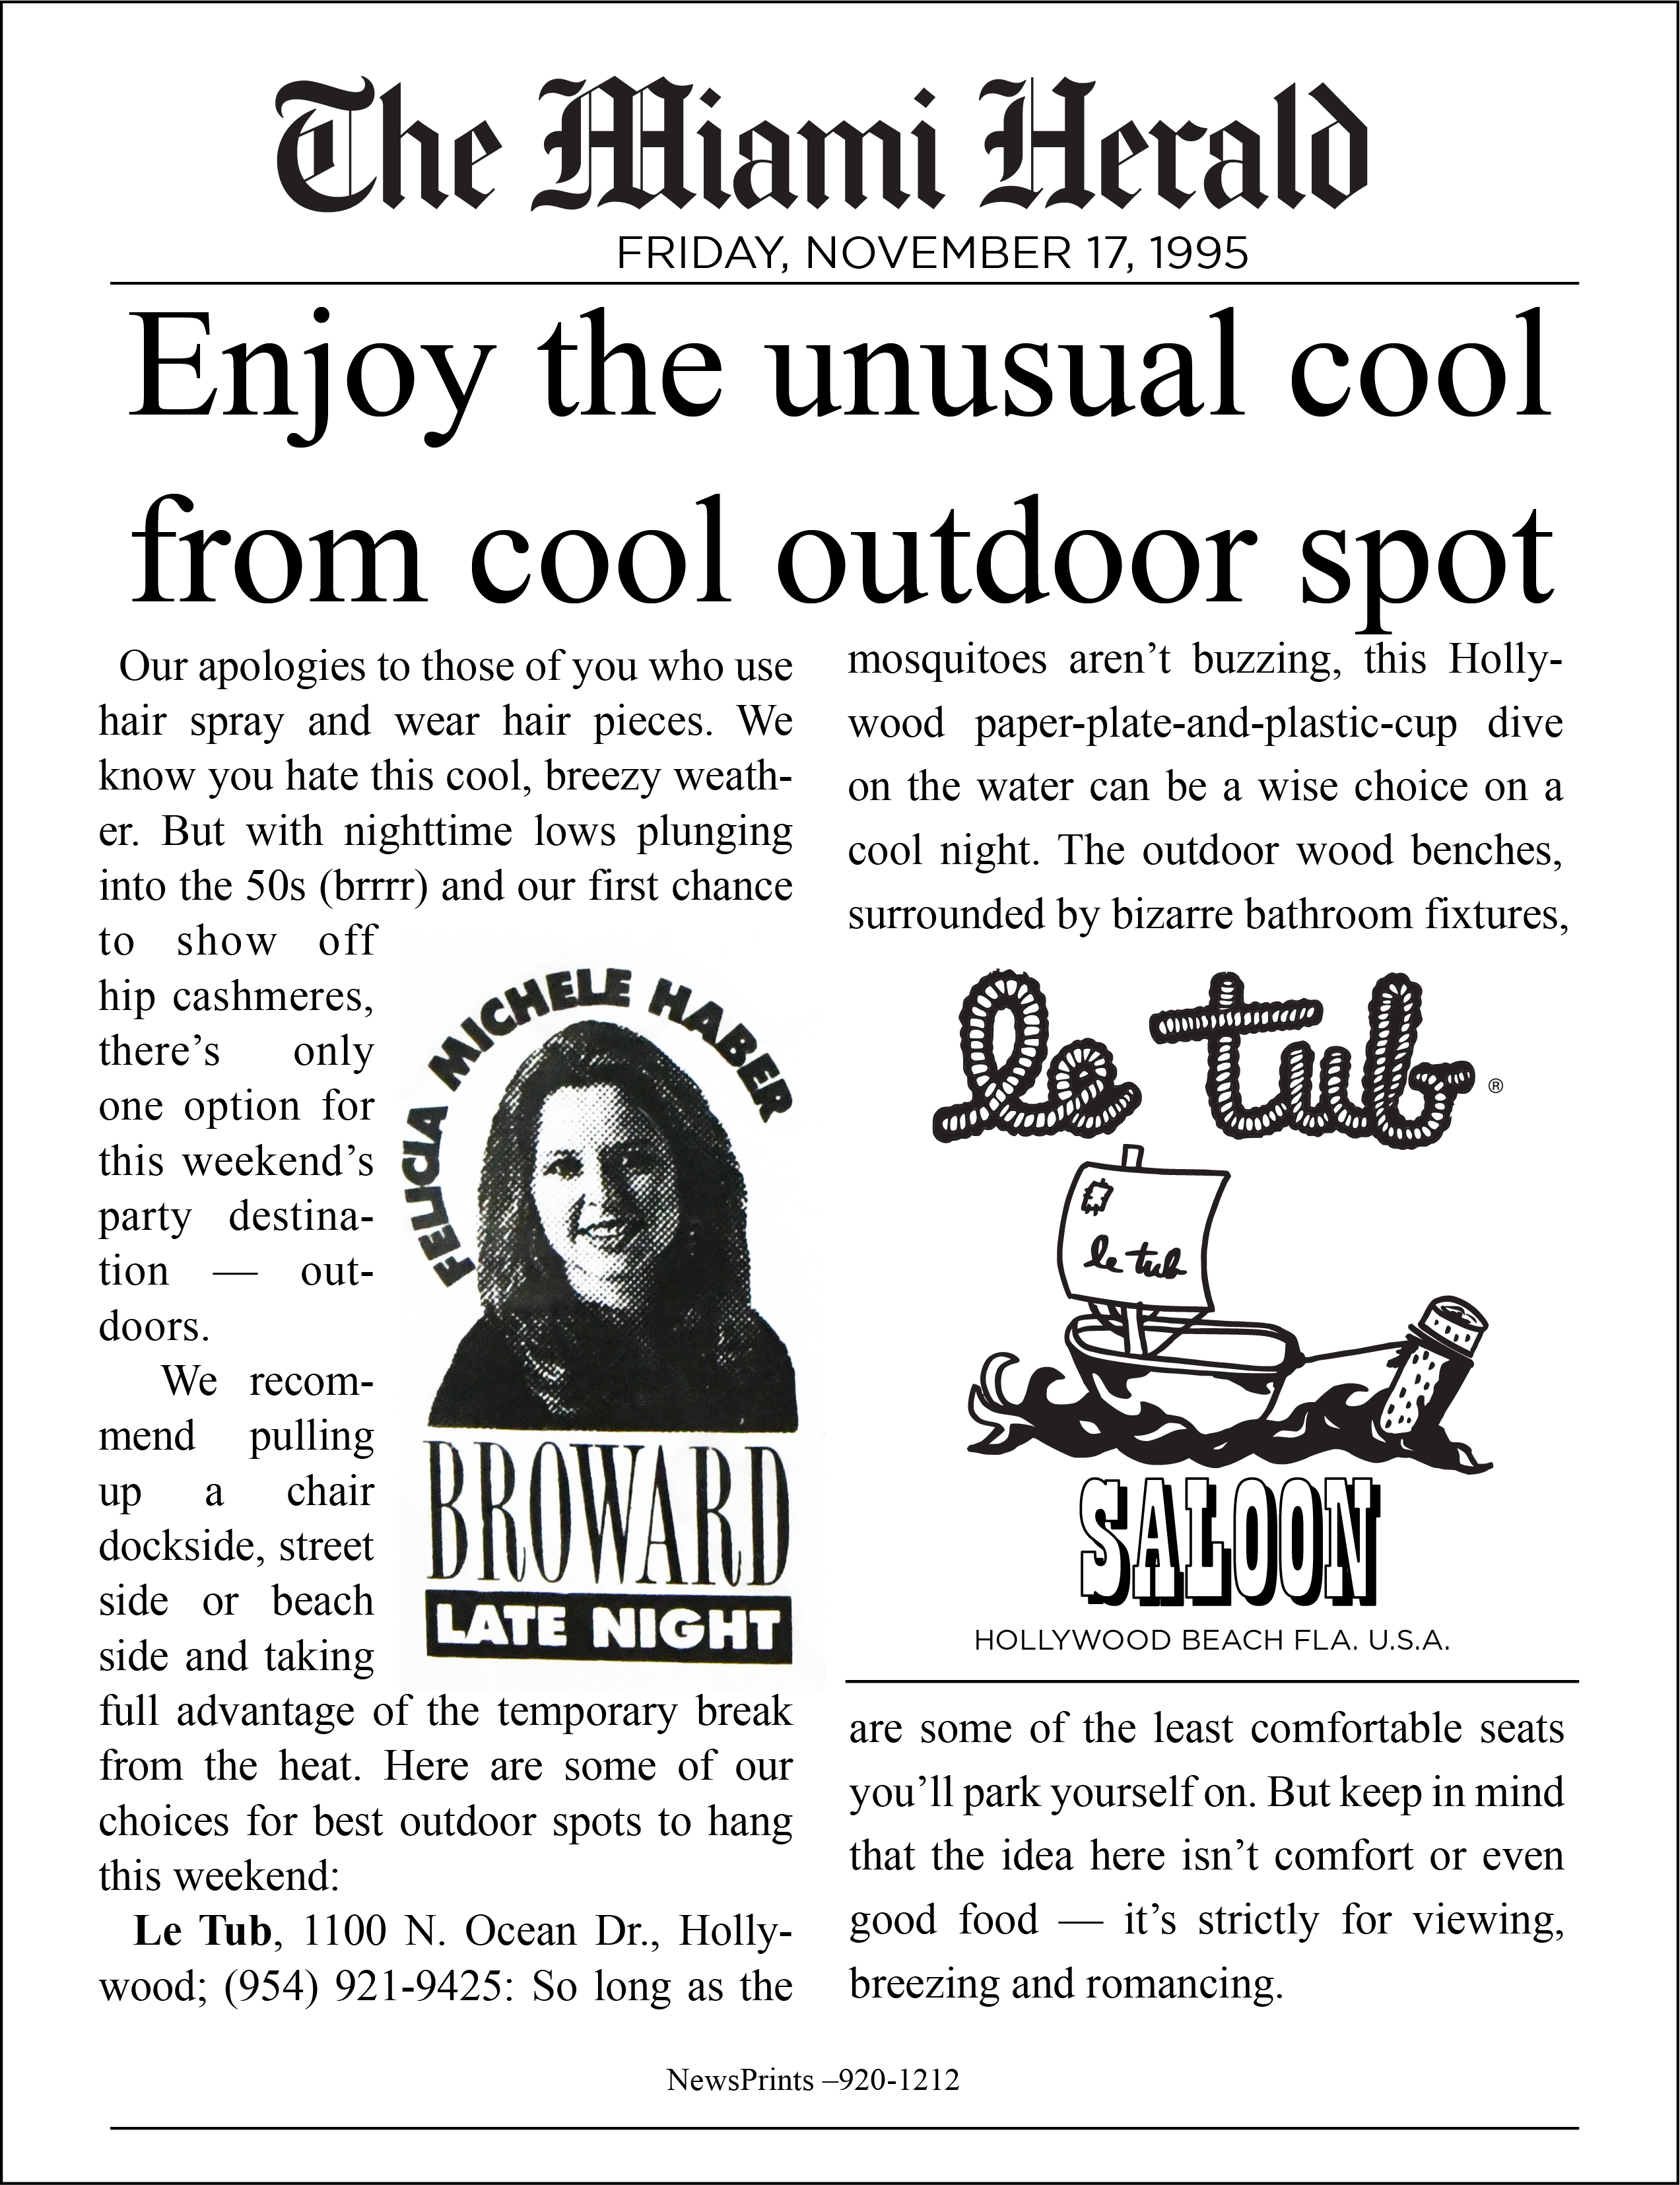 Enjoy the unusual cool from cool outdoor spot